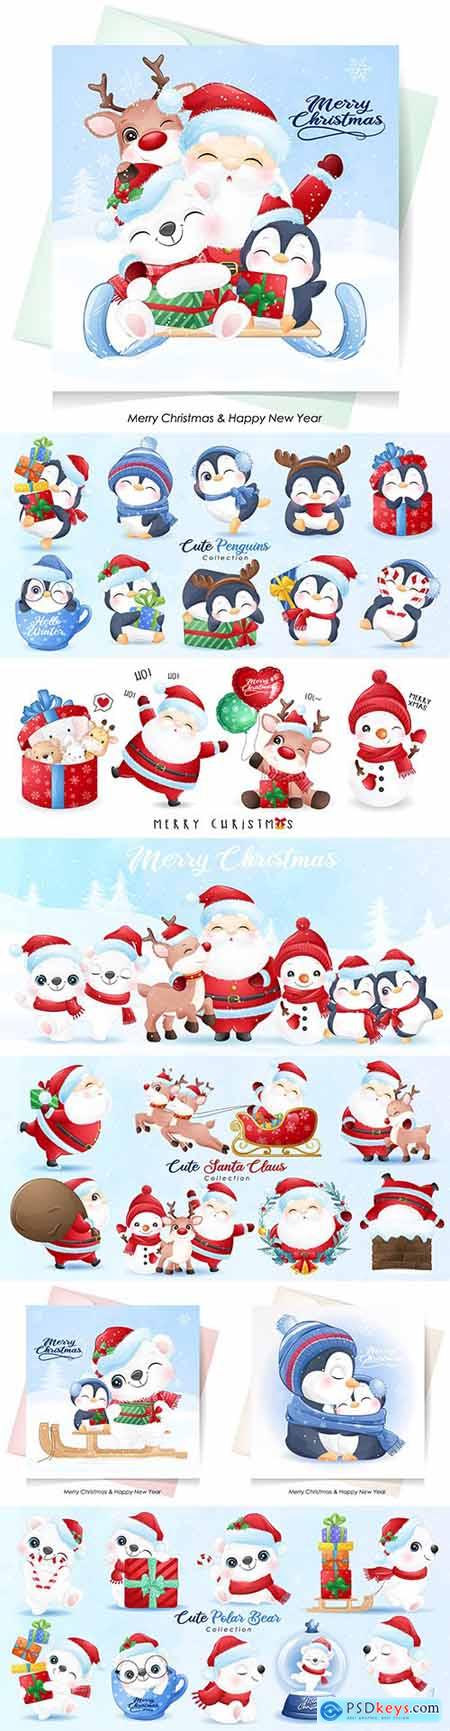 Cute Santa Claus and friends Christmas with watercolor illustration